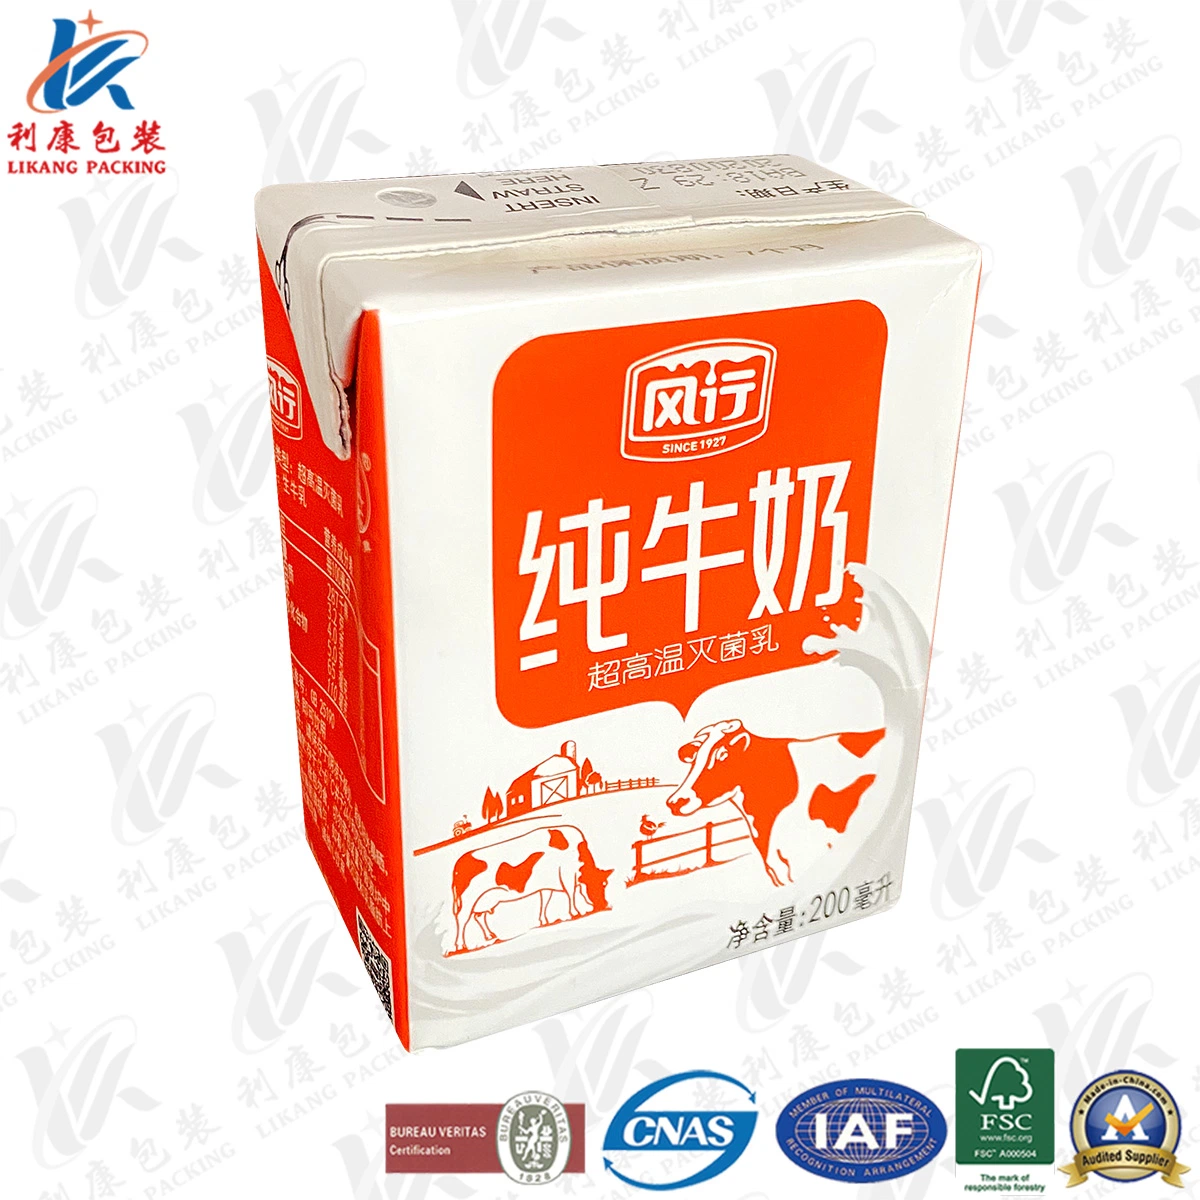 Aseptic Paperboard Packaging Materials for Filling Machine